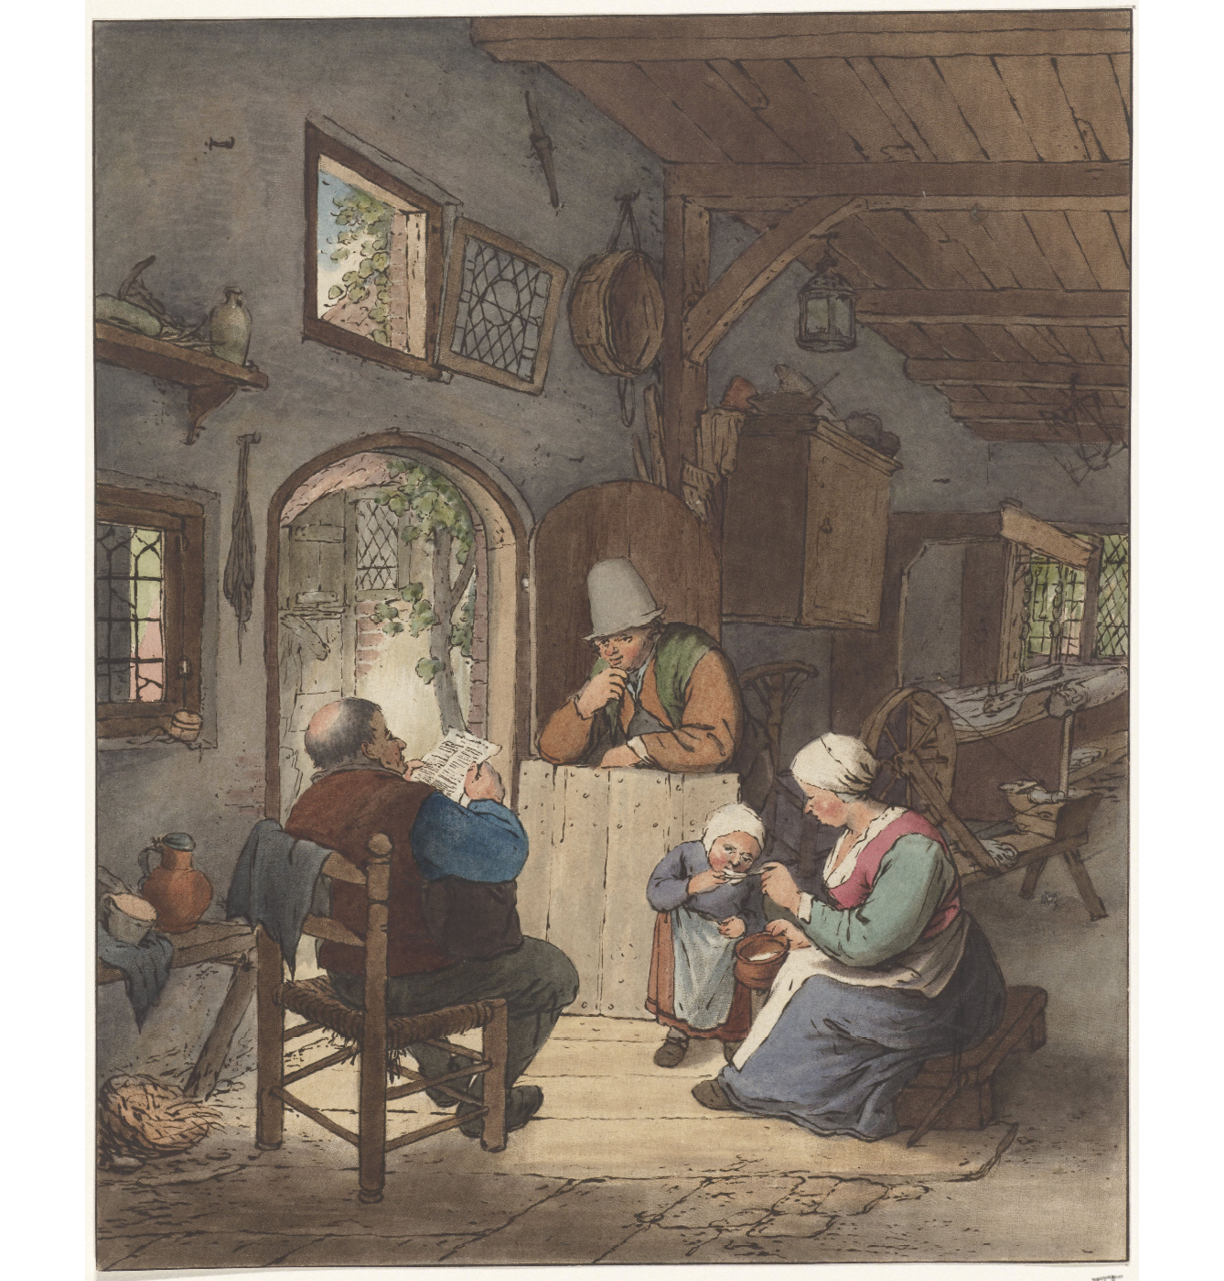 A drawing in color from 1766: shows the interior of a peasant house; on the left, near the entrance, a man sits on a wooden chair reading a newspaper; on the other side of the entrance, another man with a large hat leans against the bottom half of a door frame; to the right, a woman sits on a low stool feeding a young child.